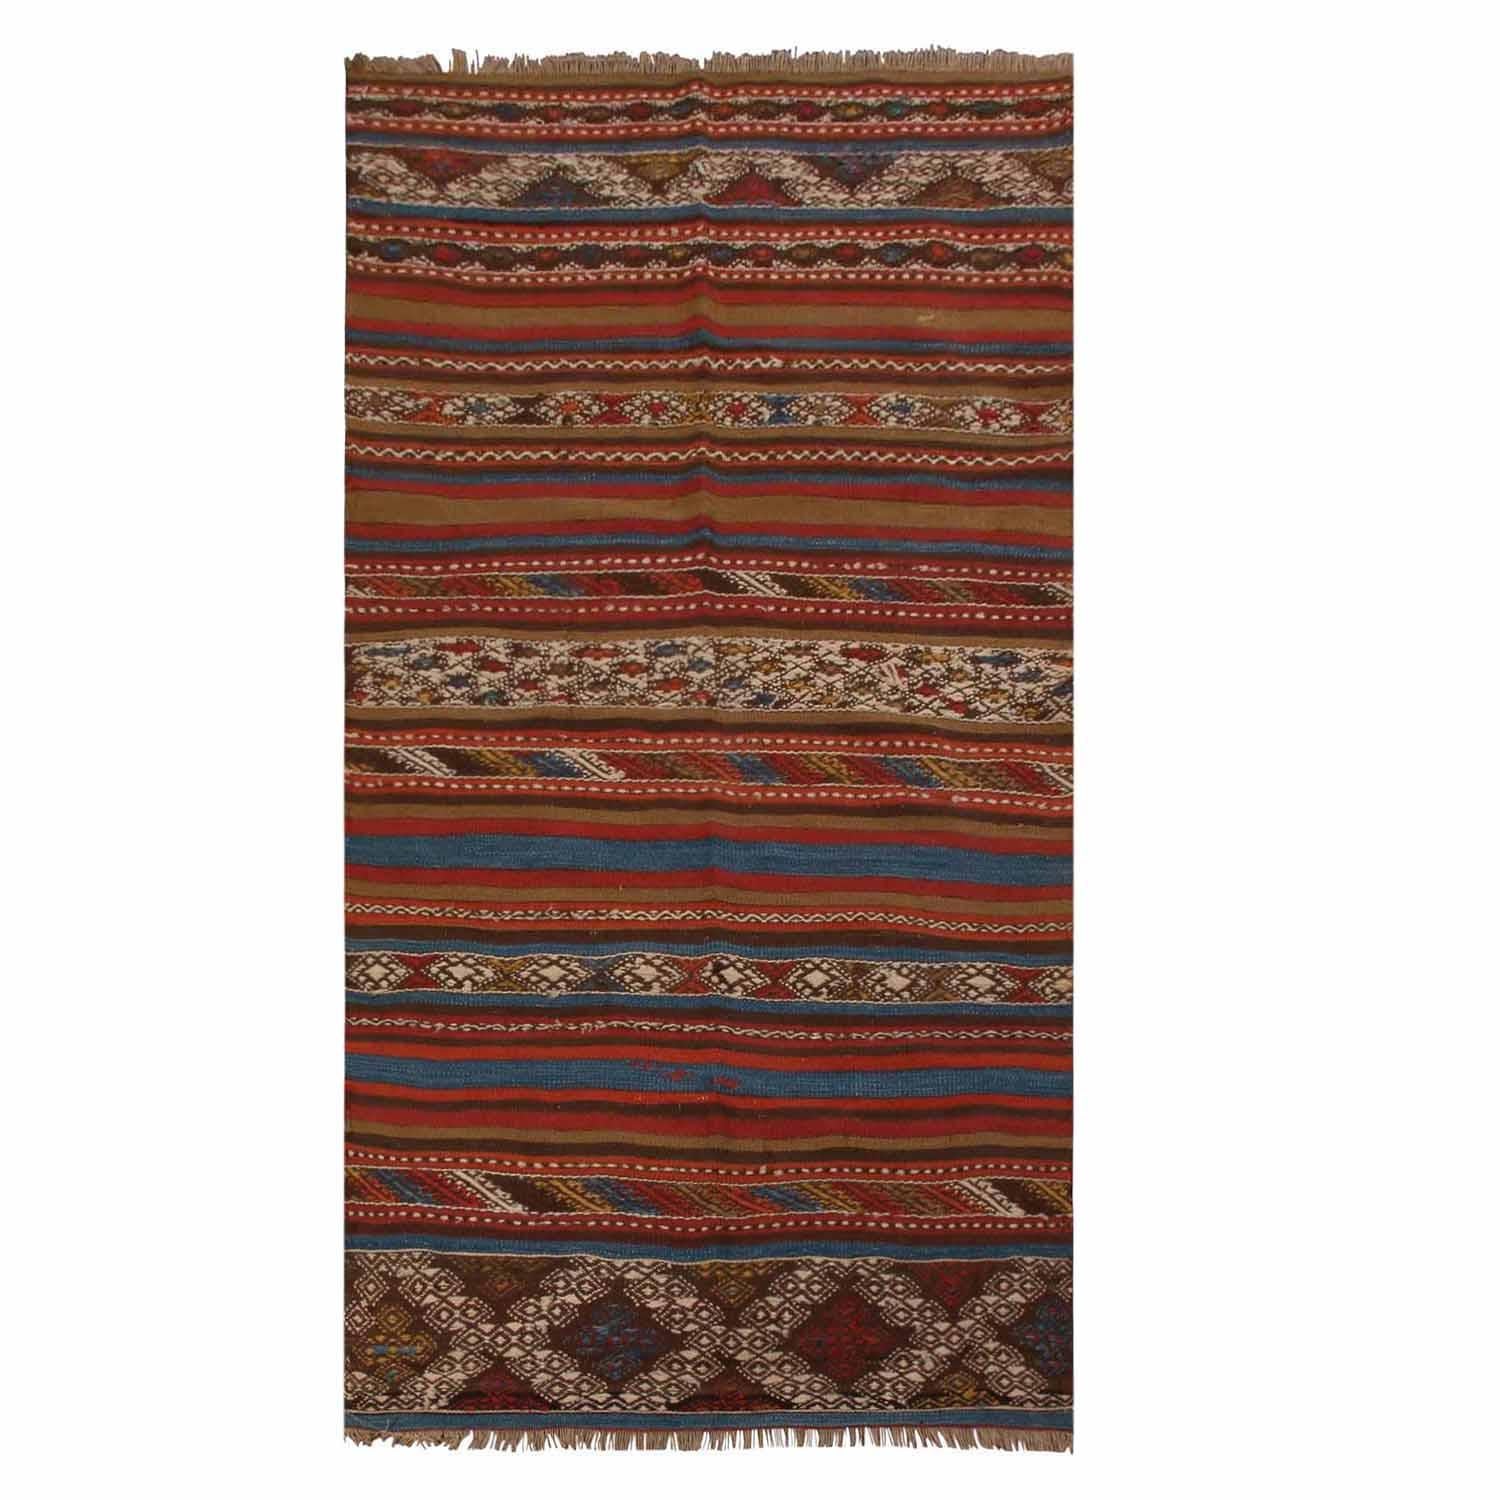 Flat-woven in high-quality wool originating from Turkey between 1940-1945, this vintage Konya Kilim rug enjoys an interesting departure from traditionally mirrored borders and a further intriguing pallet of vibrant rich and pastel colorways